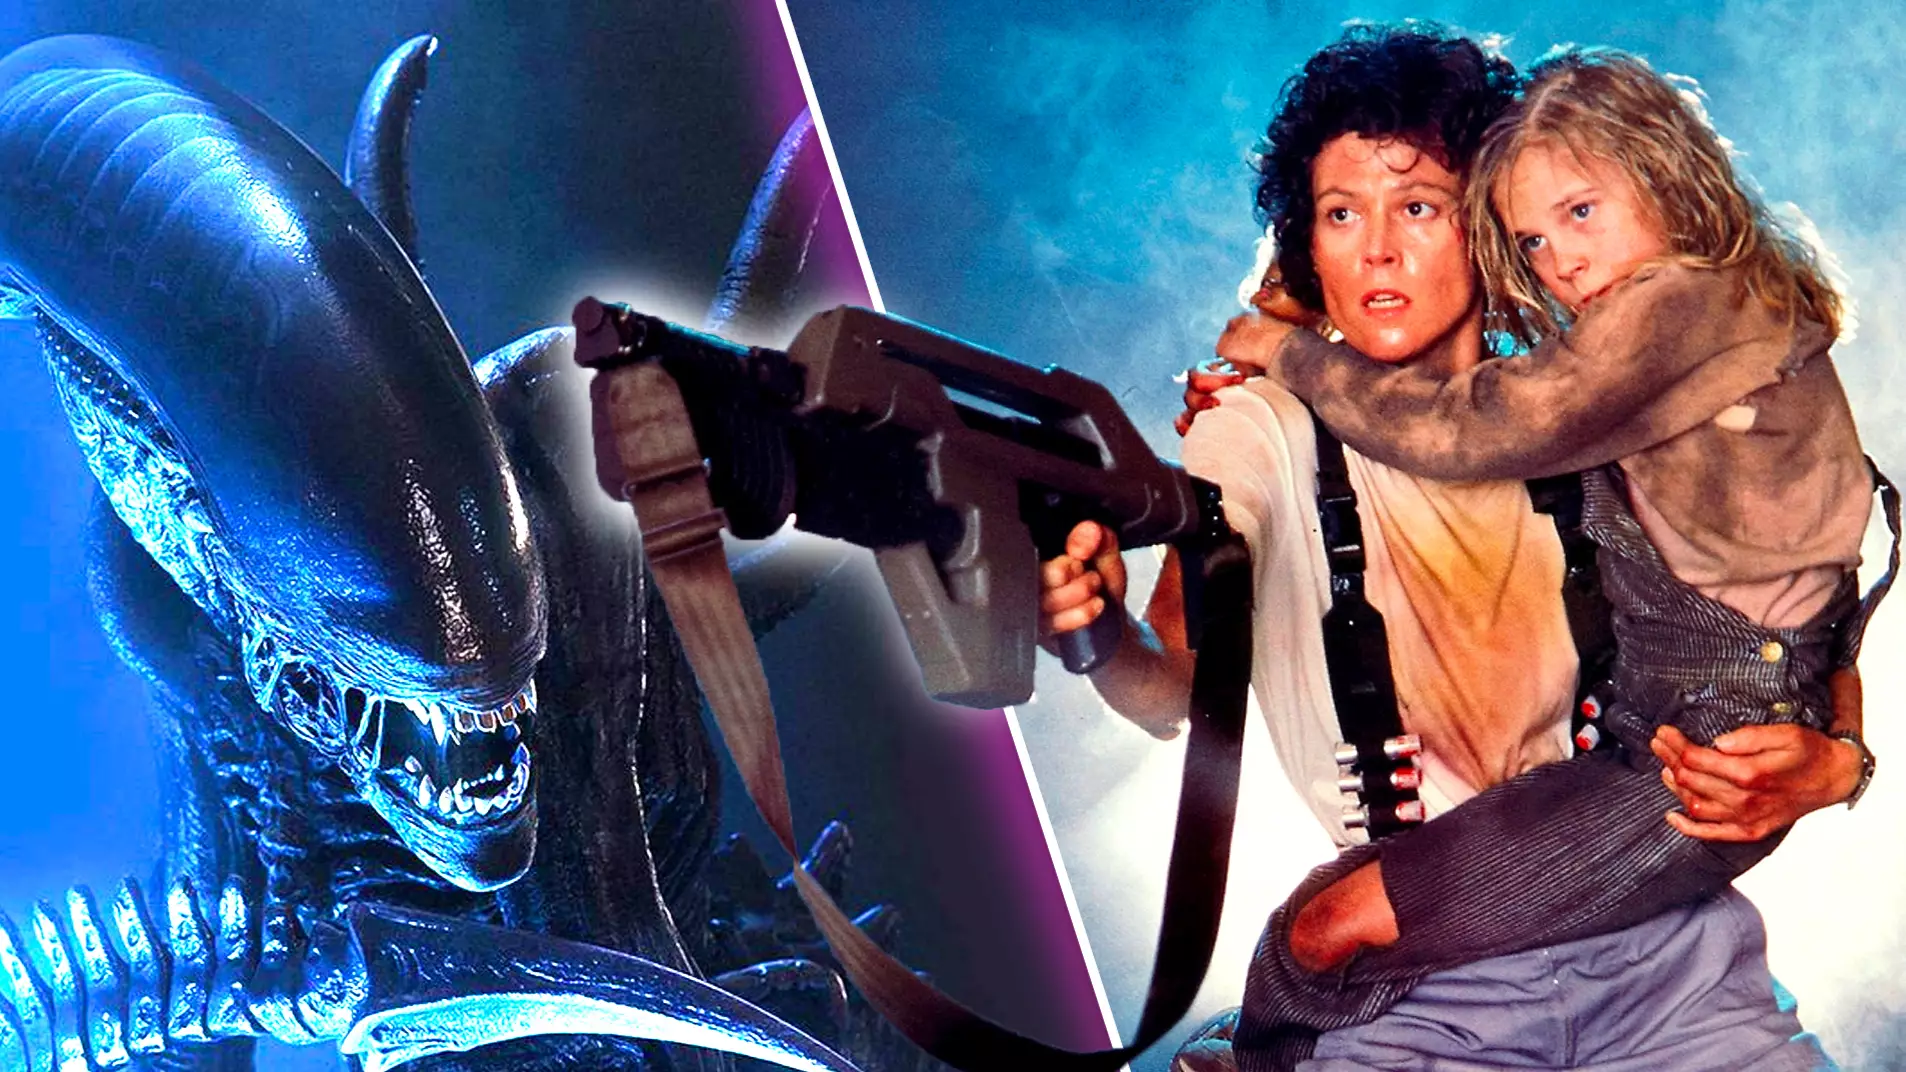 ‘Aliens’ At 35: These Are The Alien Video Games We Wish We Could Play